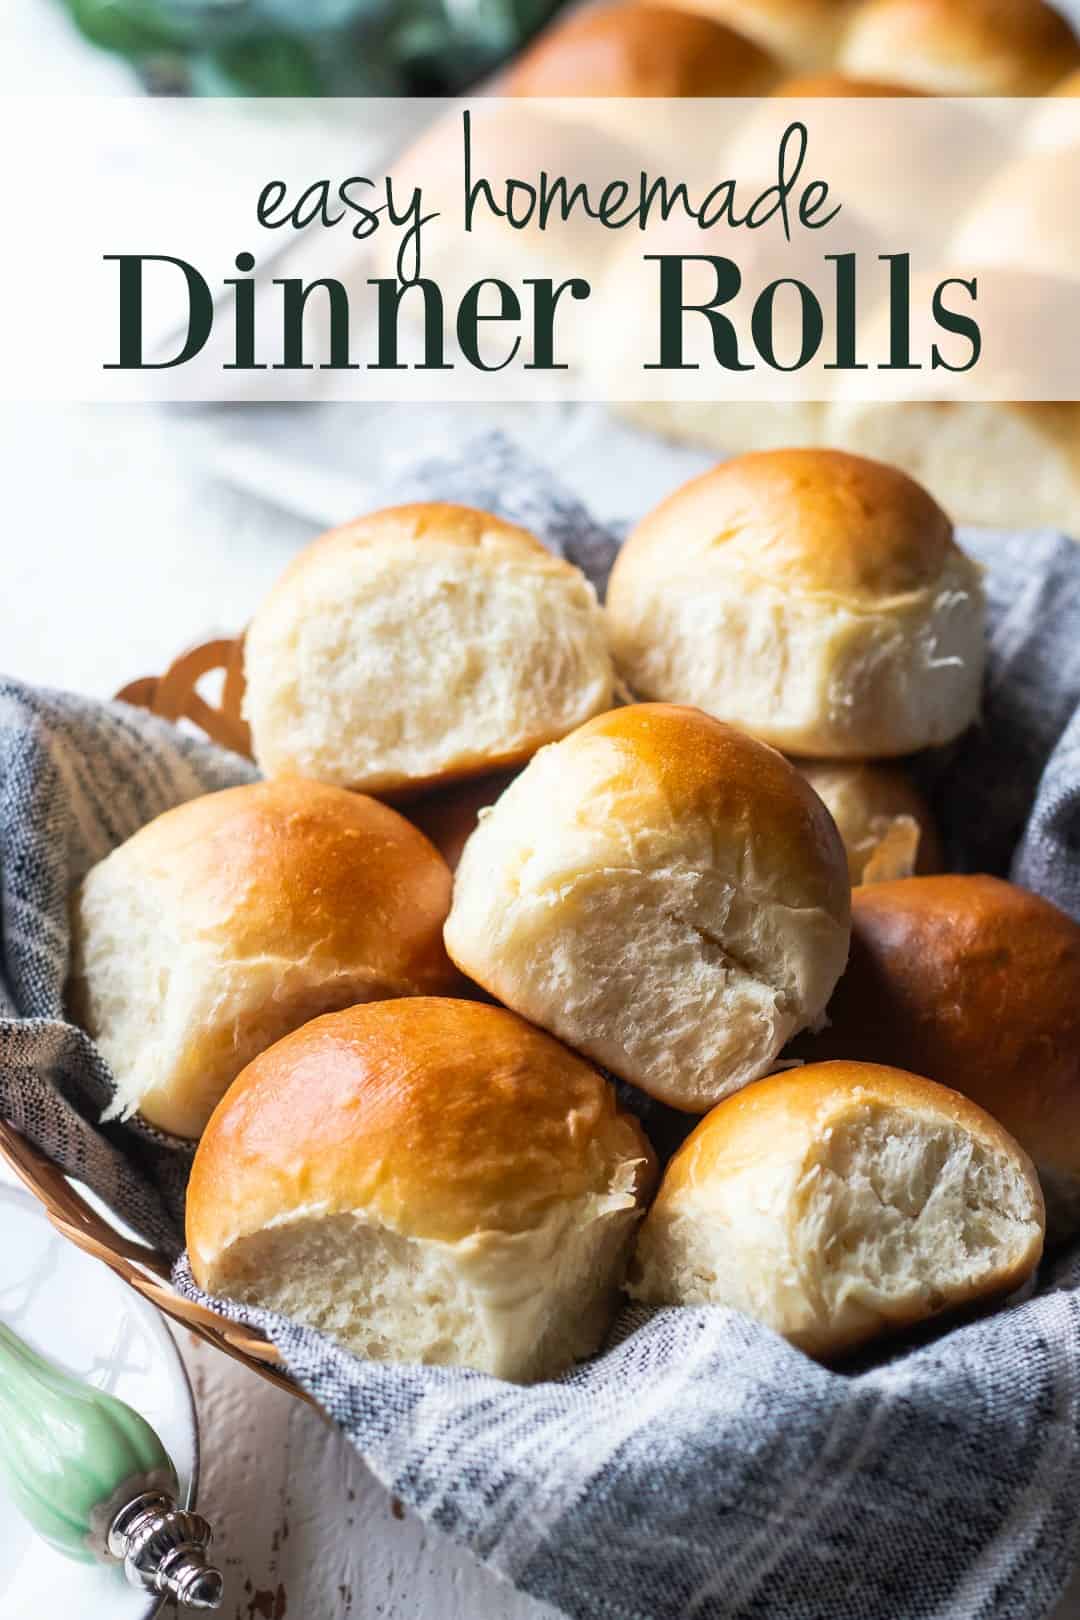 Basket of soft homemade dinner rolls with a text overlay above that reads "Easy Homemade Dinner Rolls."